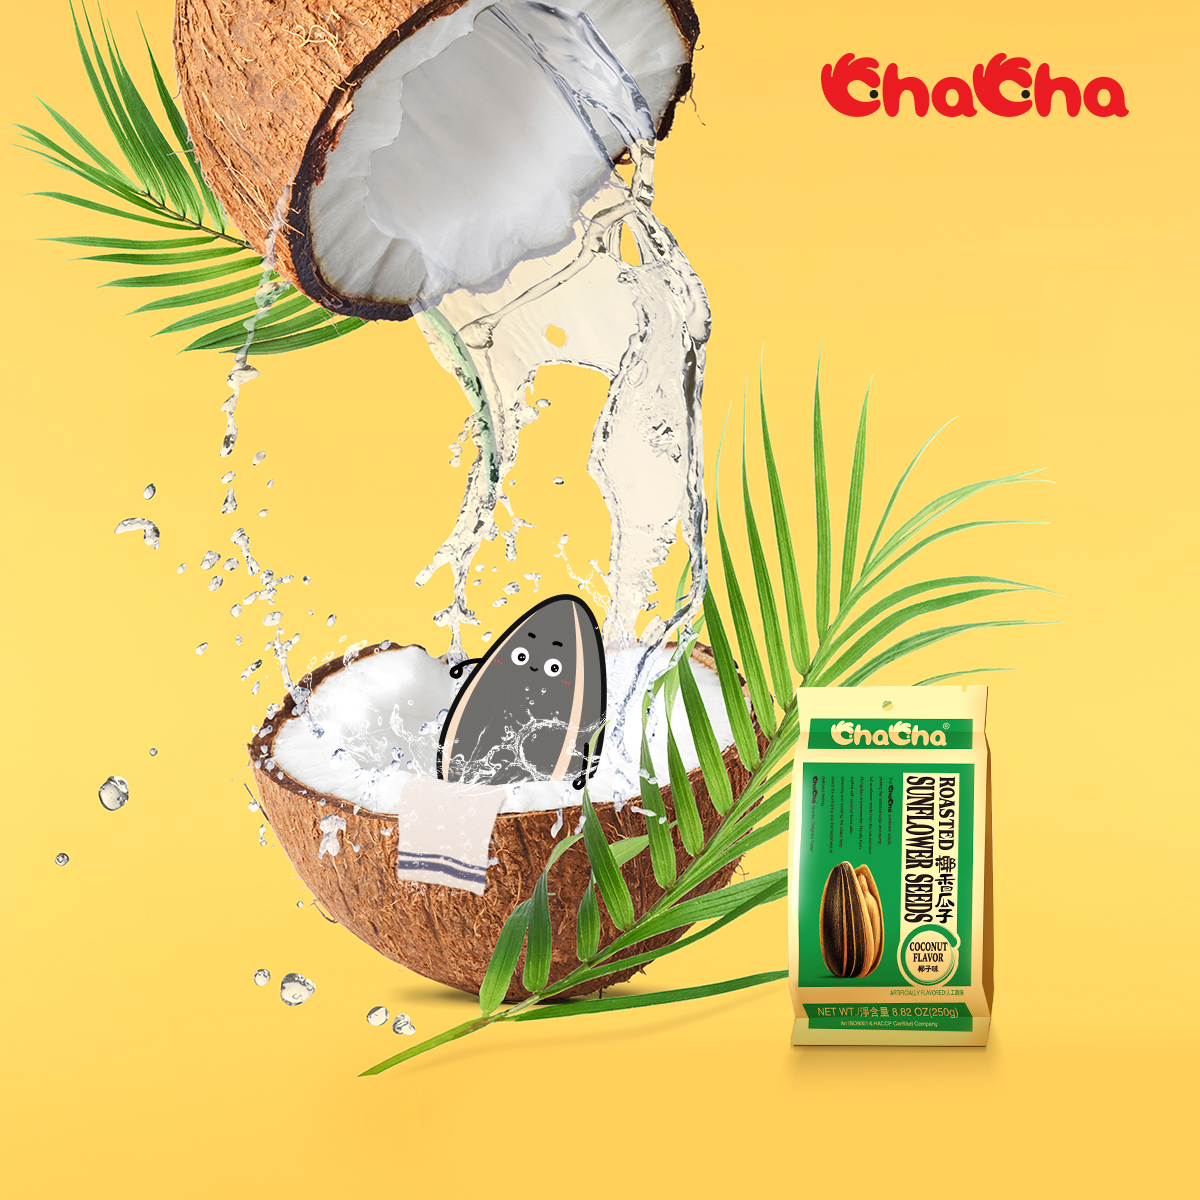 Take your taste buds on a flavor adventure with ChaCha Sunflower Seeds! Our unique coconut flavor makes every bite a delicious surprise. #ChaCha Fresh